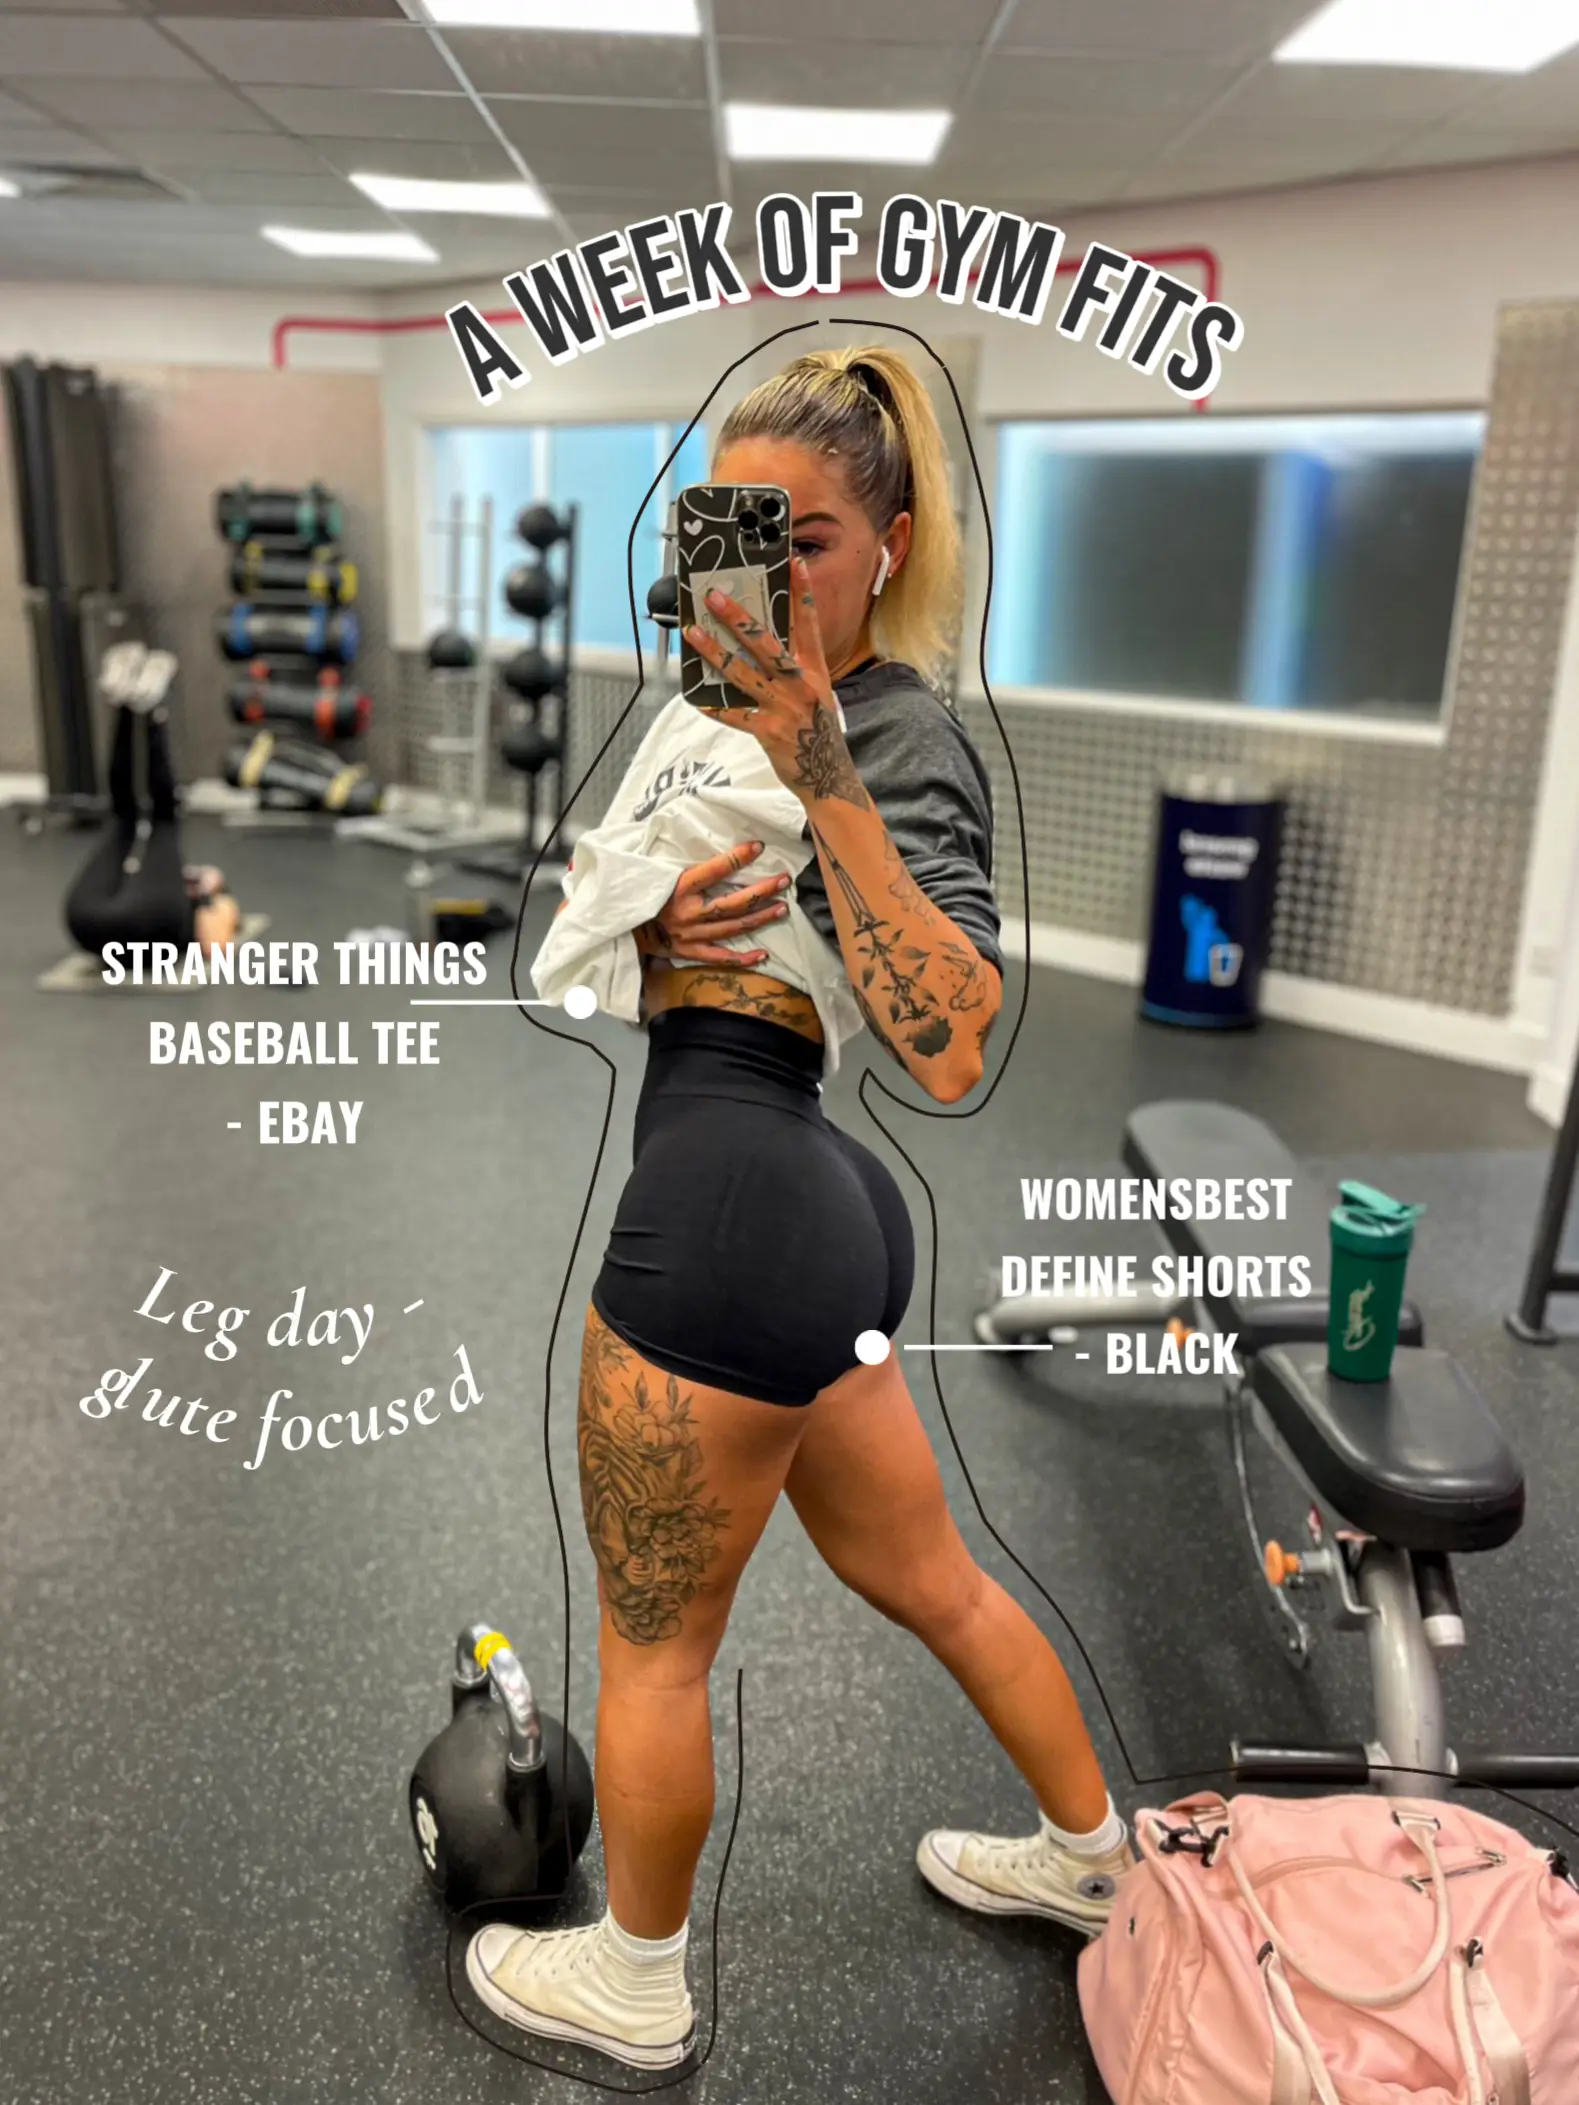 A WEEK OF GYM FITS🤍, Gallery posted by daisyliftsuk